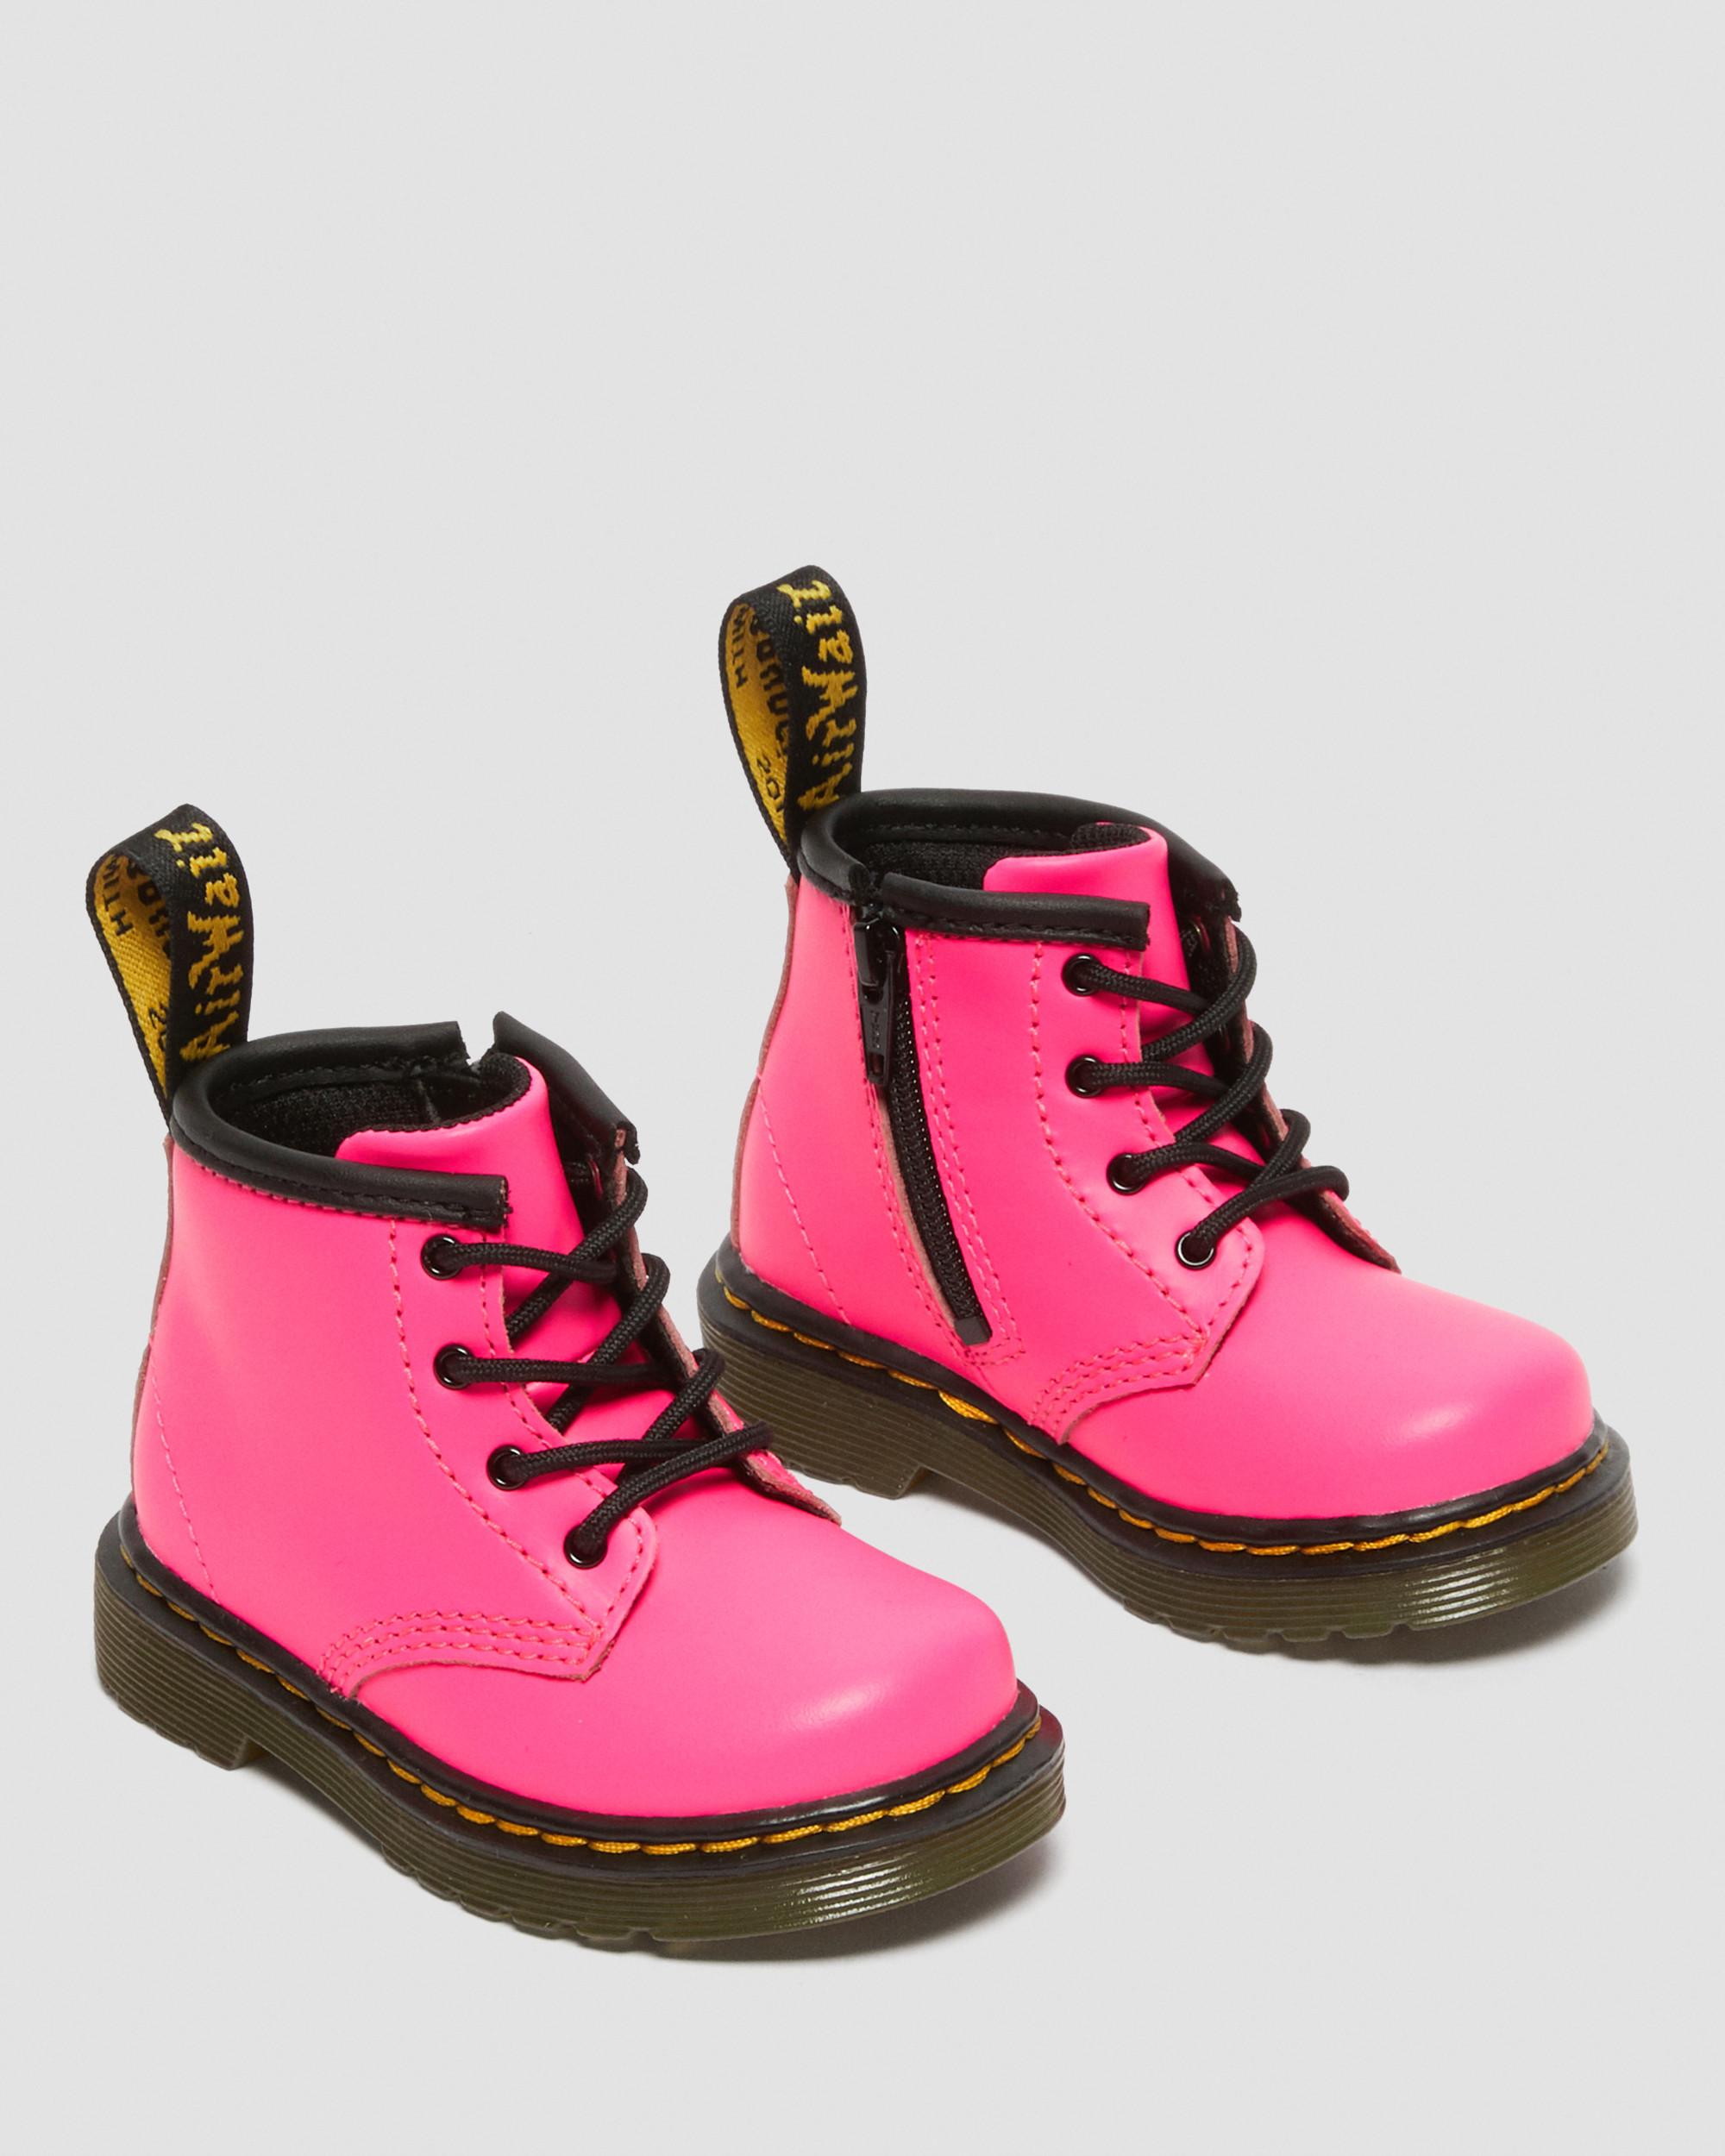 Infant 1460 Softy T Leather Lace Up Boots in Pink